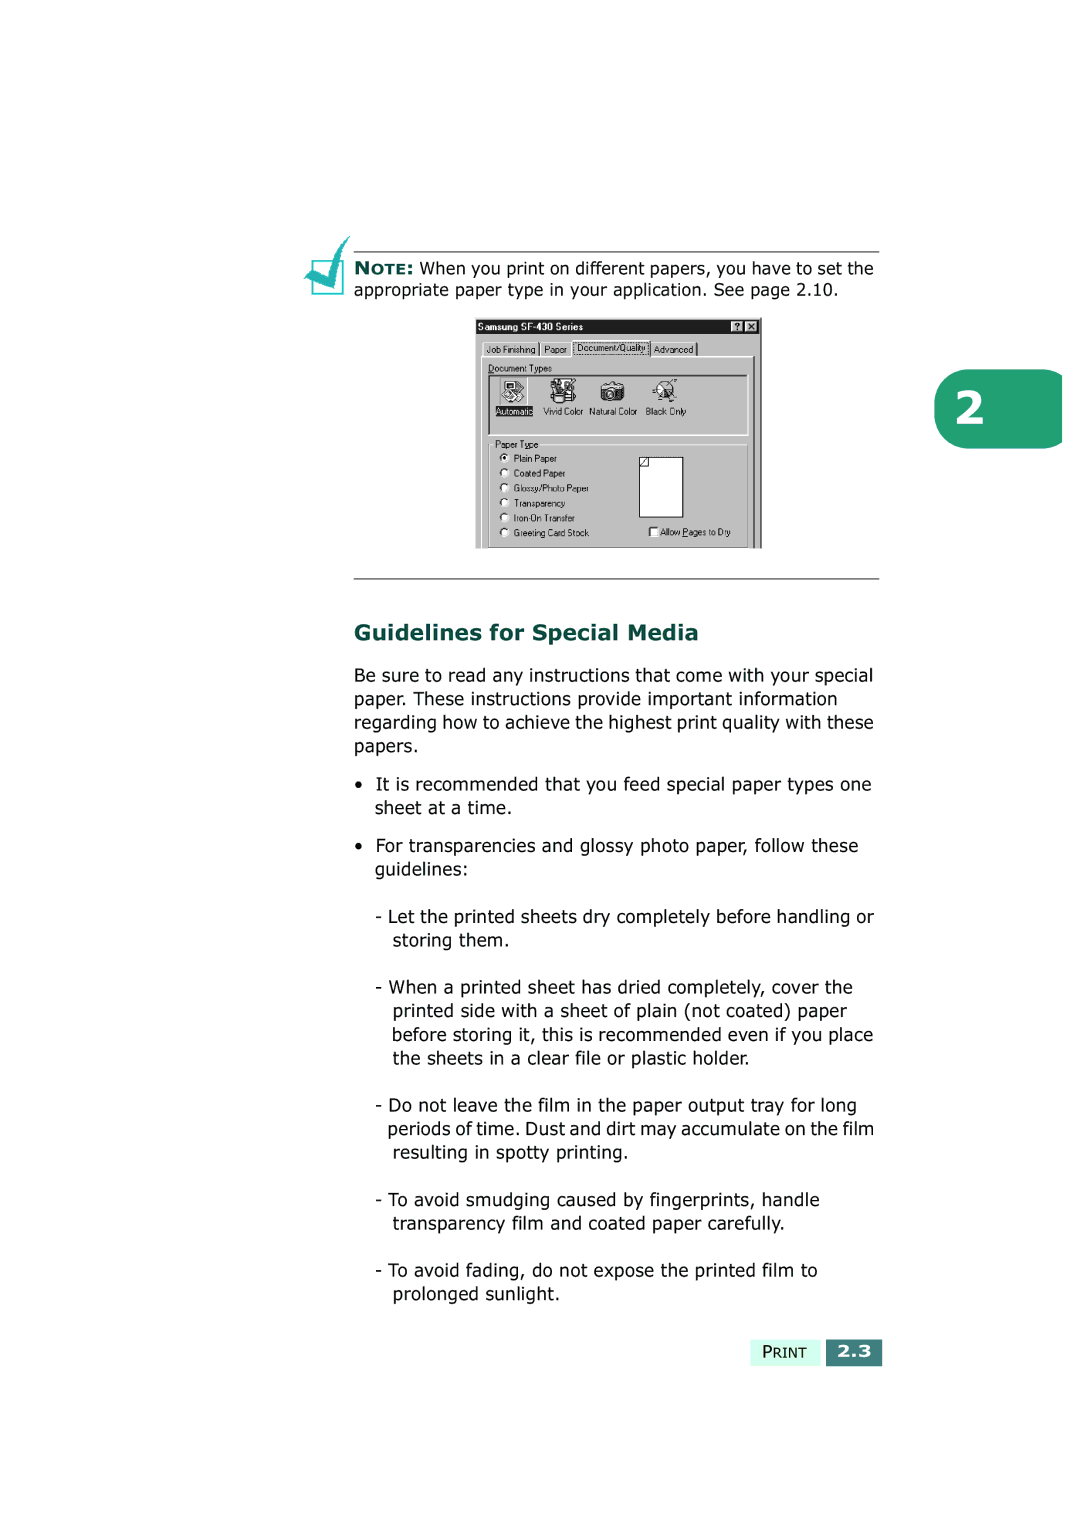 Samsung SF-430 manual Guidelines for Special Media 